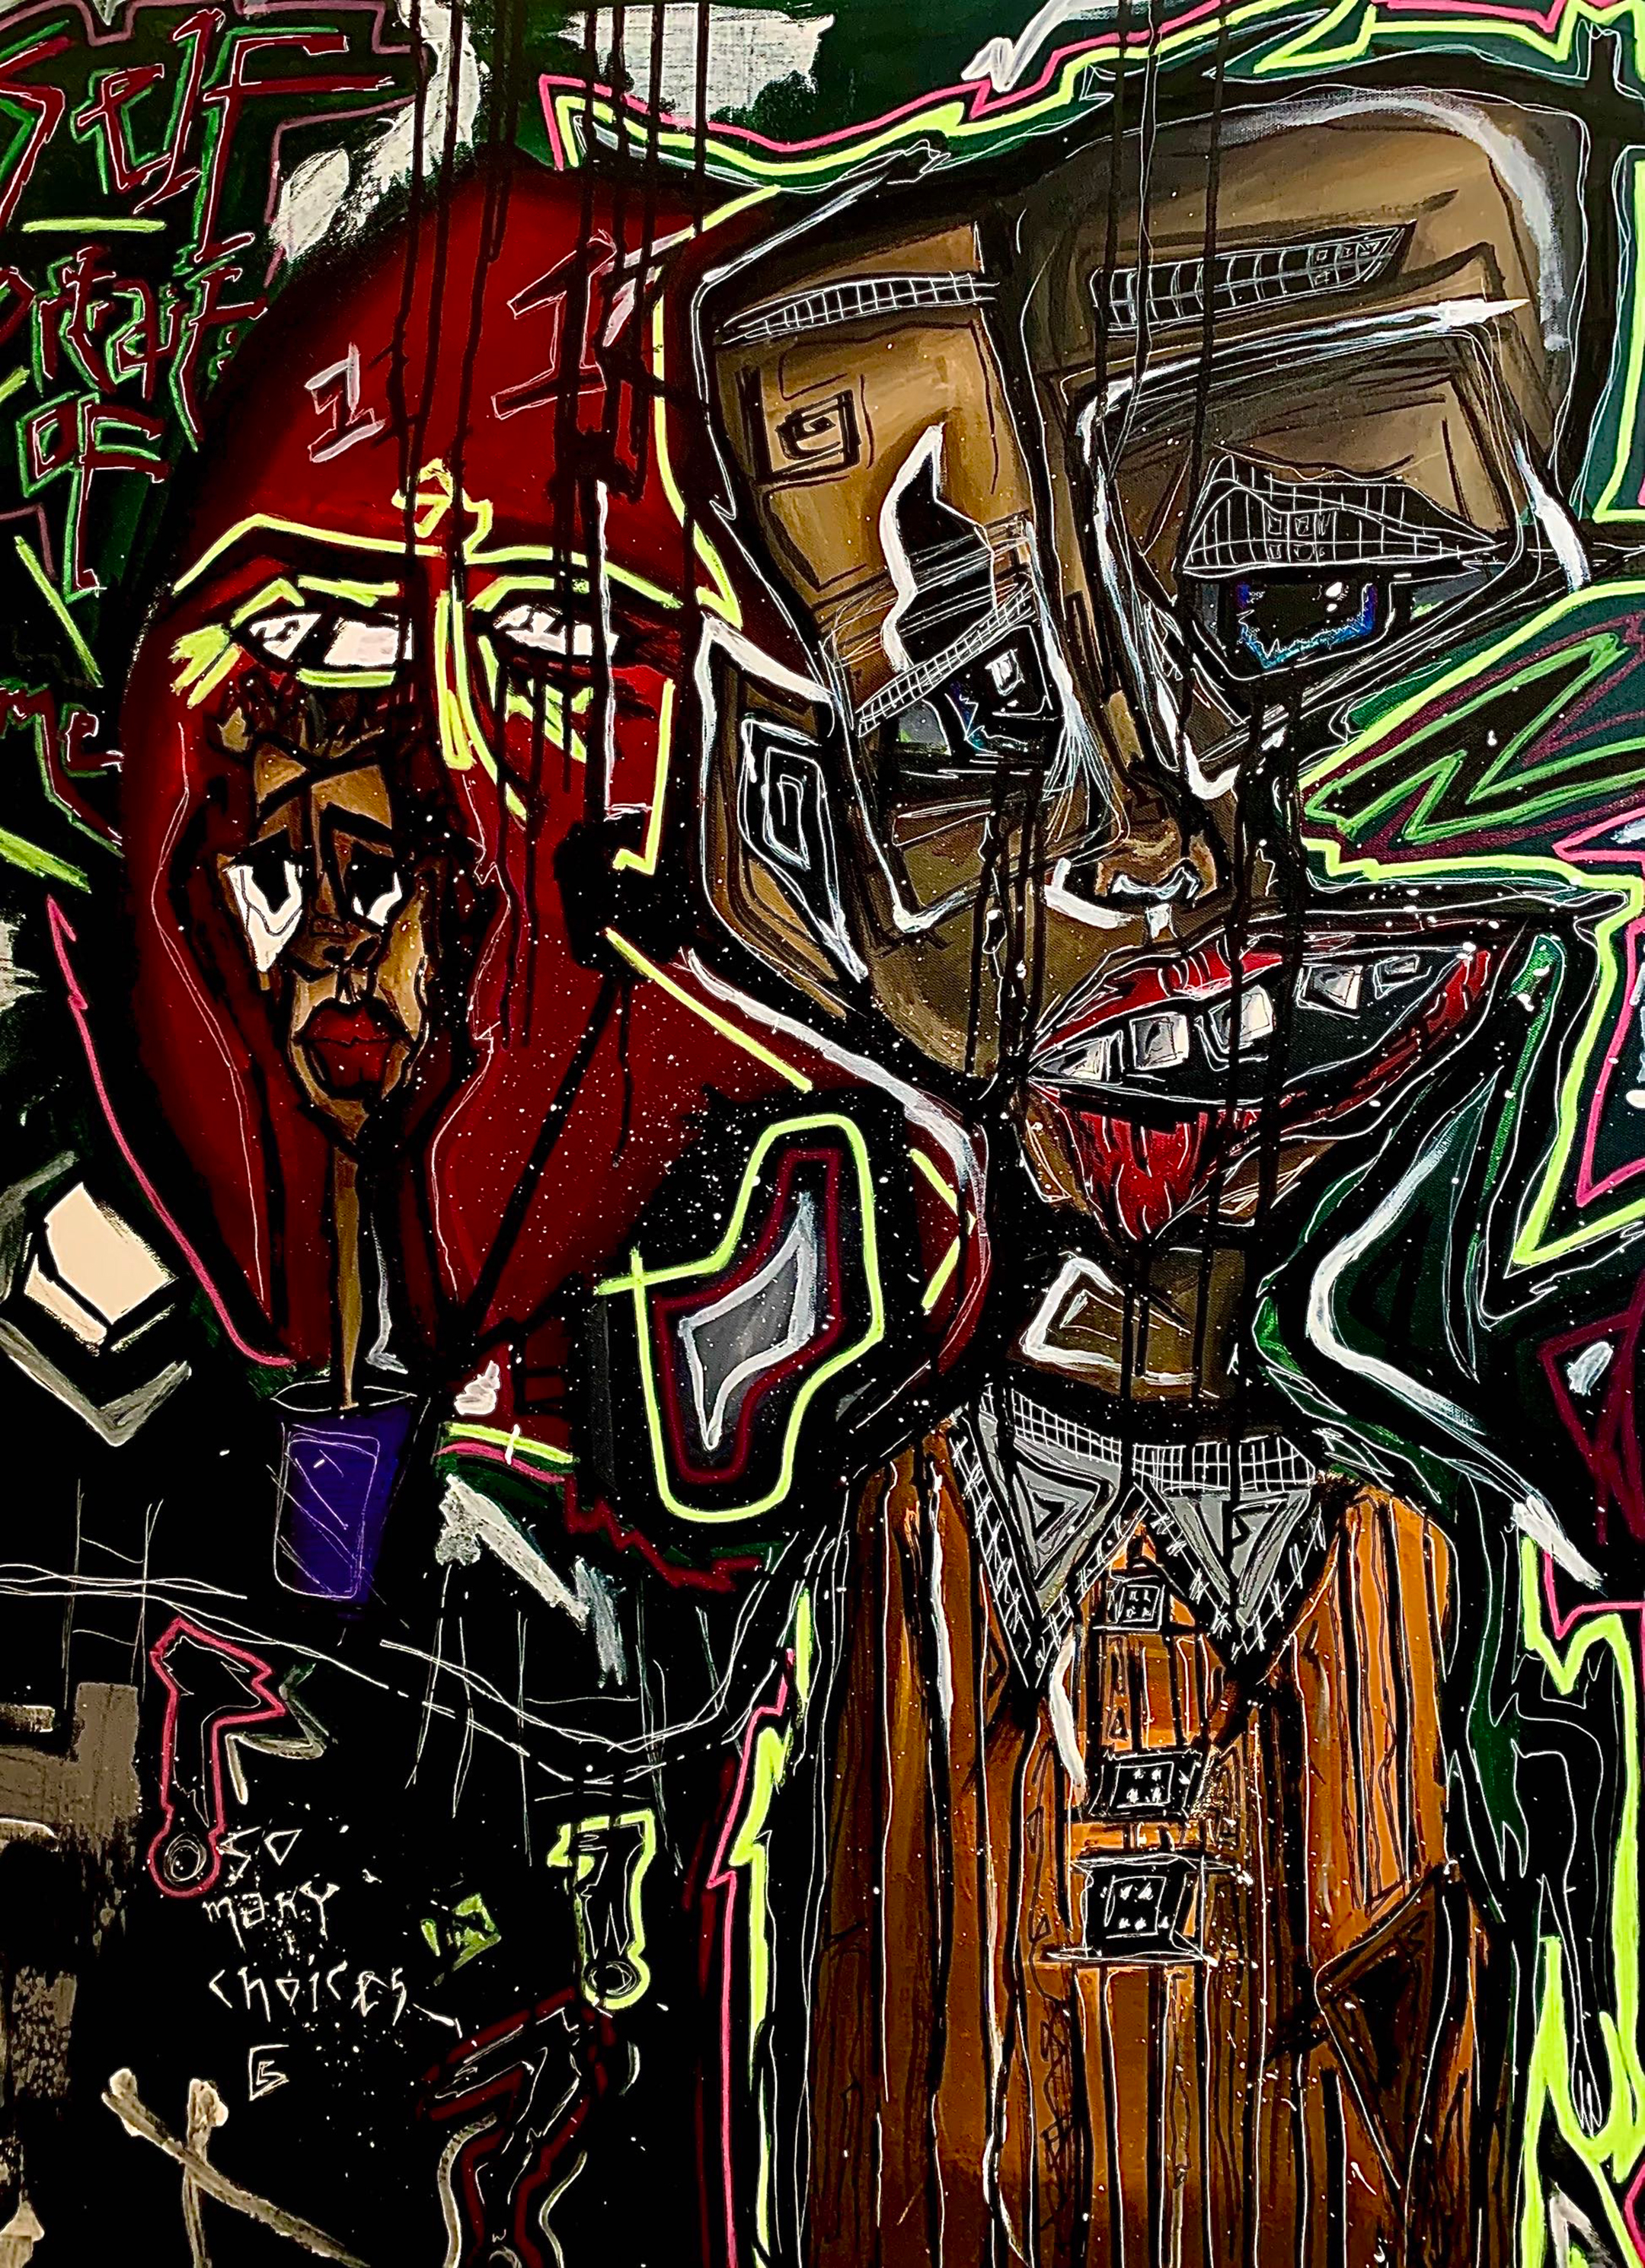 Abstract painting in dark greens, reds, and muted colors depicting two people in weird monstrous forms